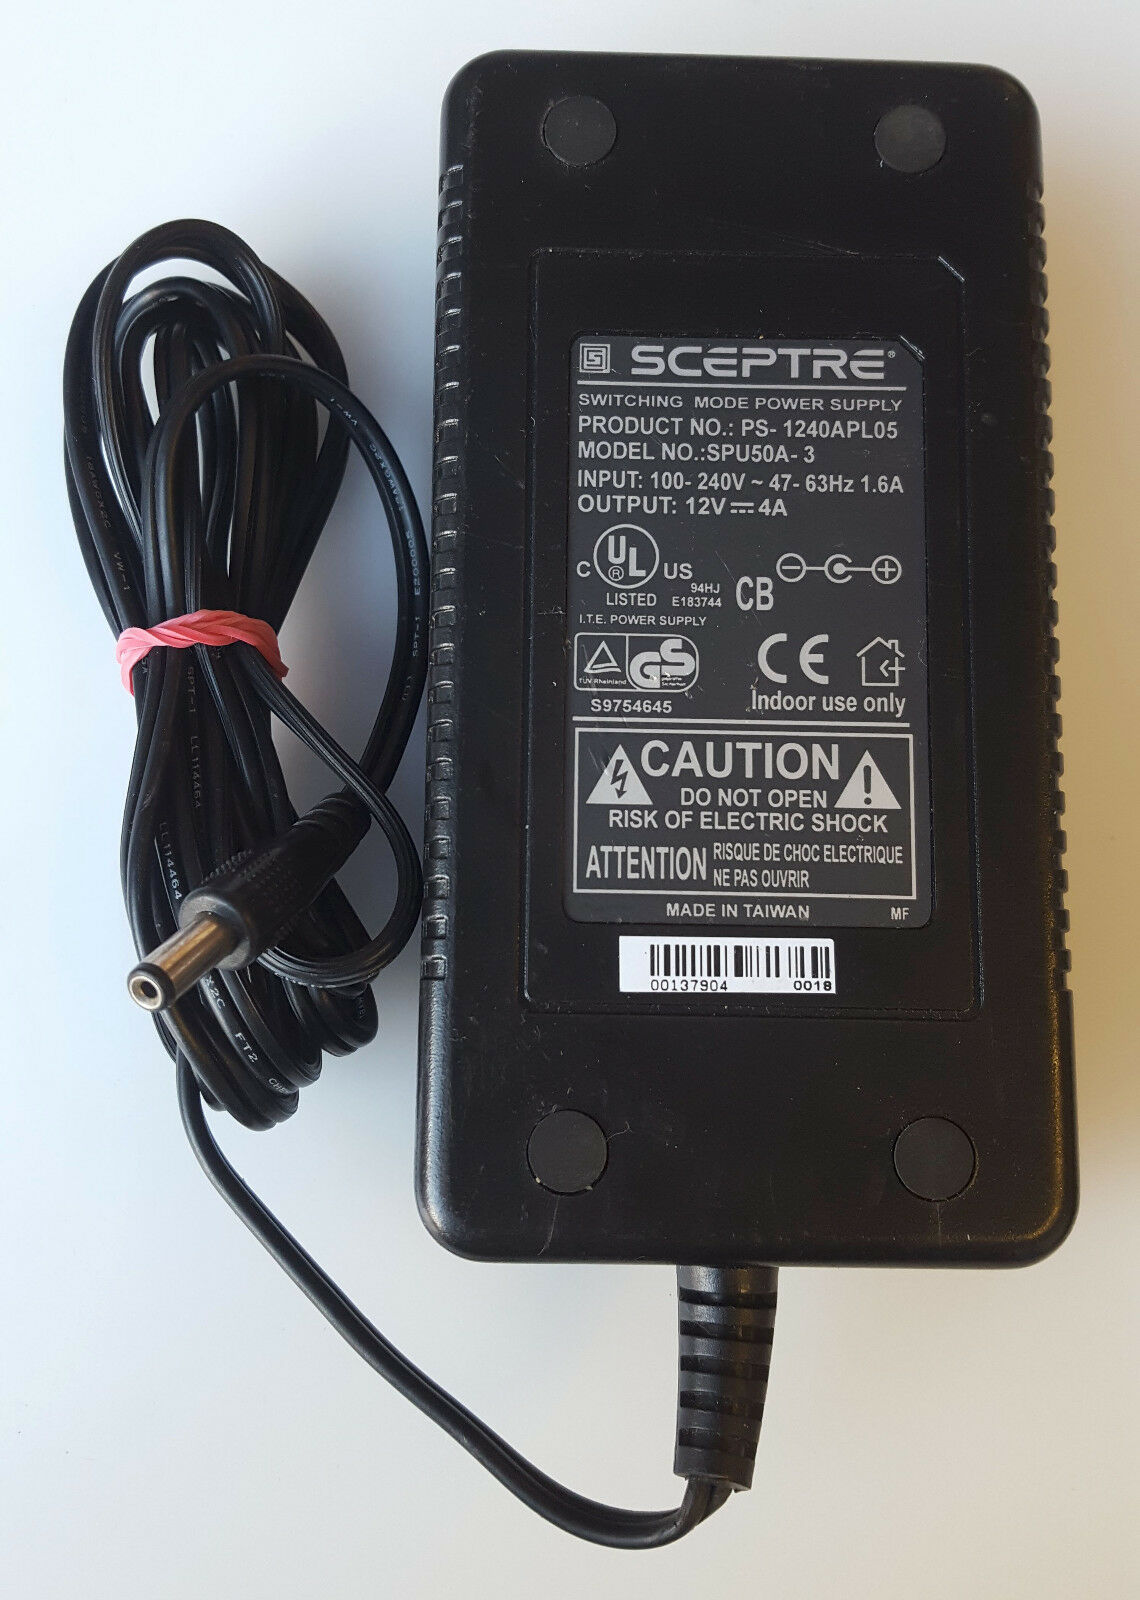 New SCEPTRE SPU50A-3 12V 4.0A PS-1240APL05 AC/DC POWER SUPPLY ADAPTER